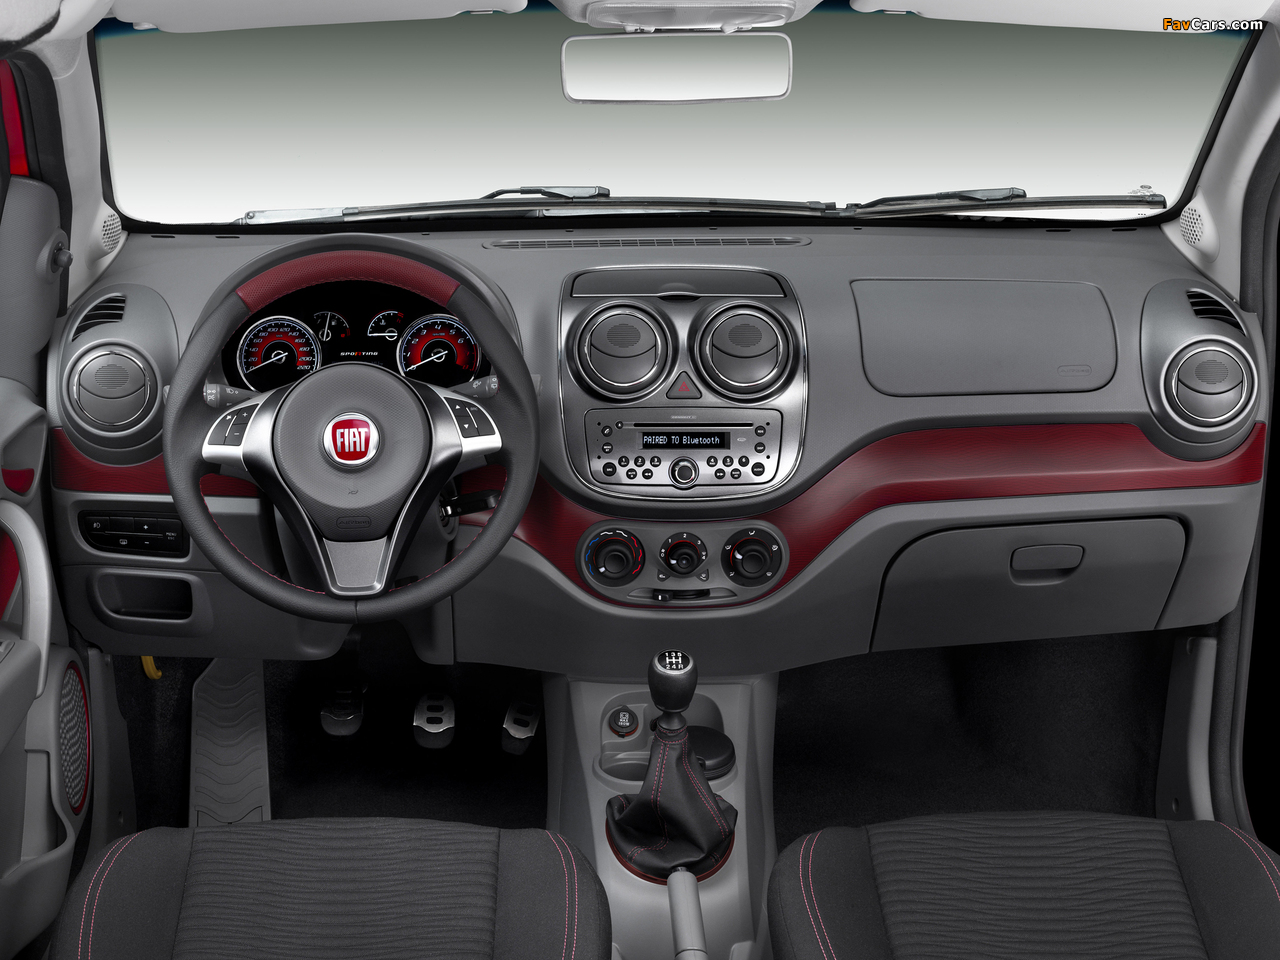 Fiat Palio Sporting (326) 2011 images (1280 x 960)